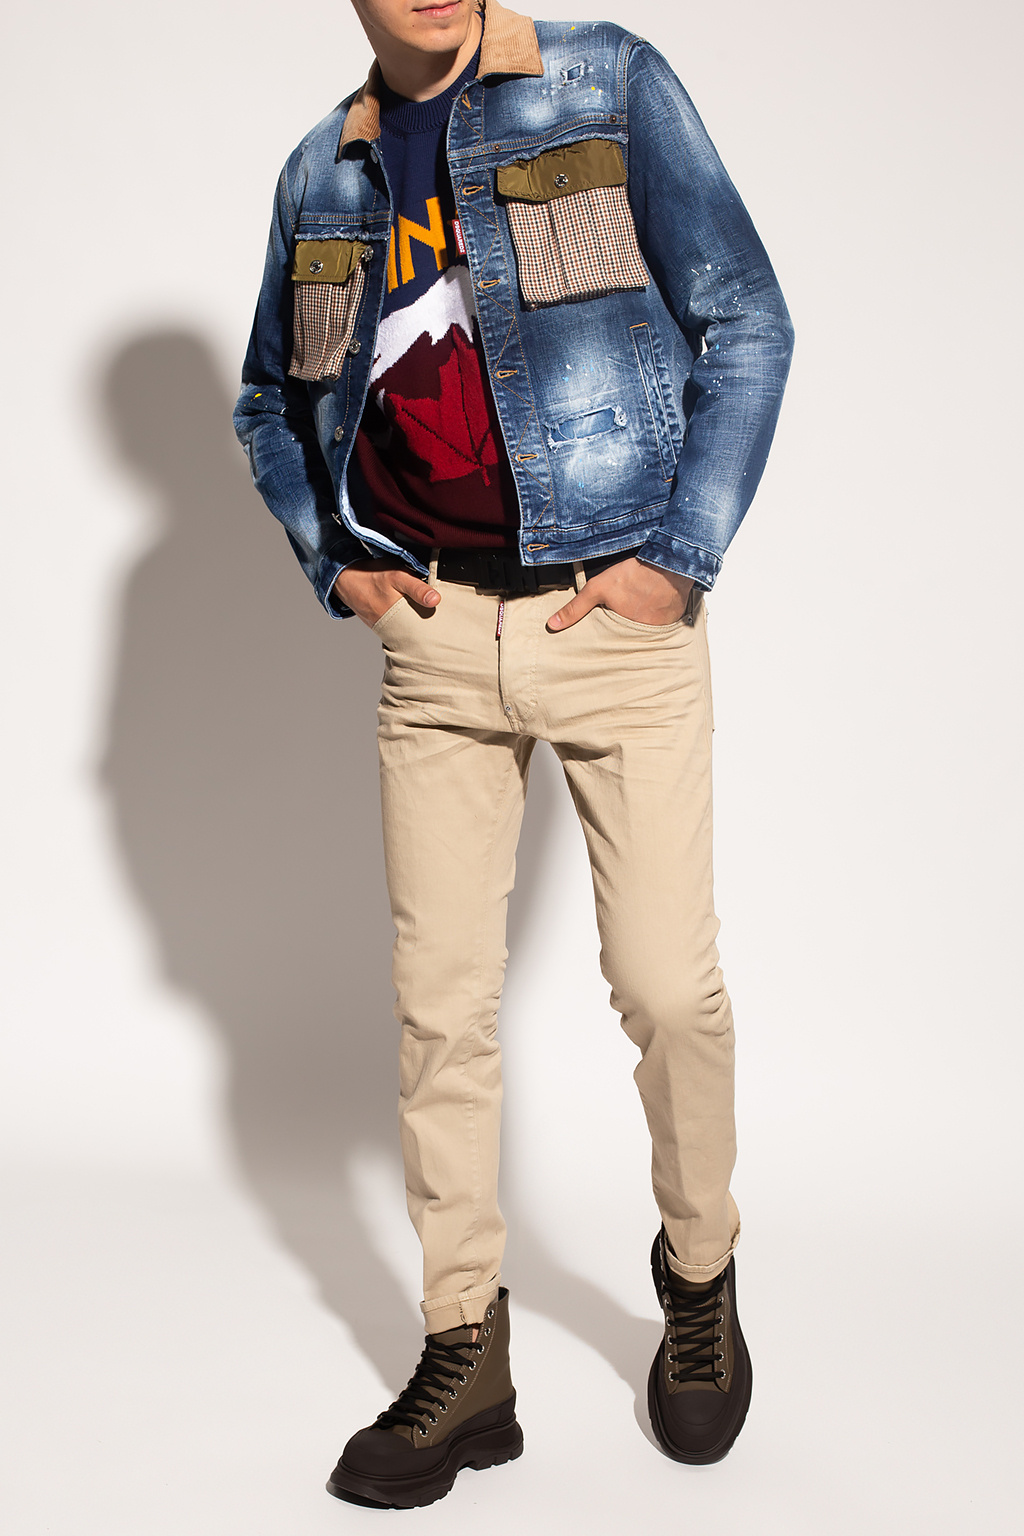 Dsquared2 'Cool Guy' jeans